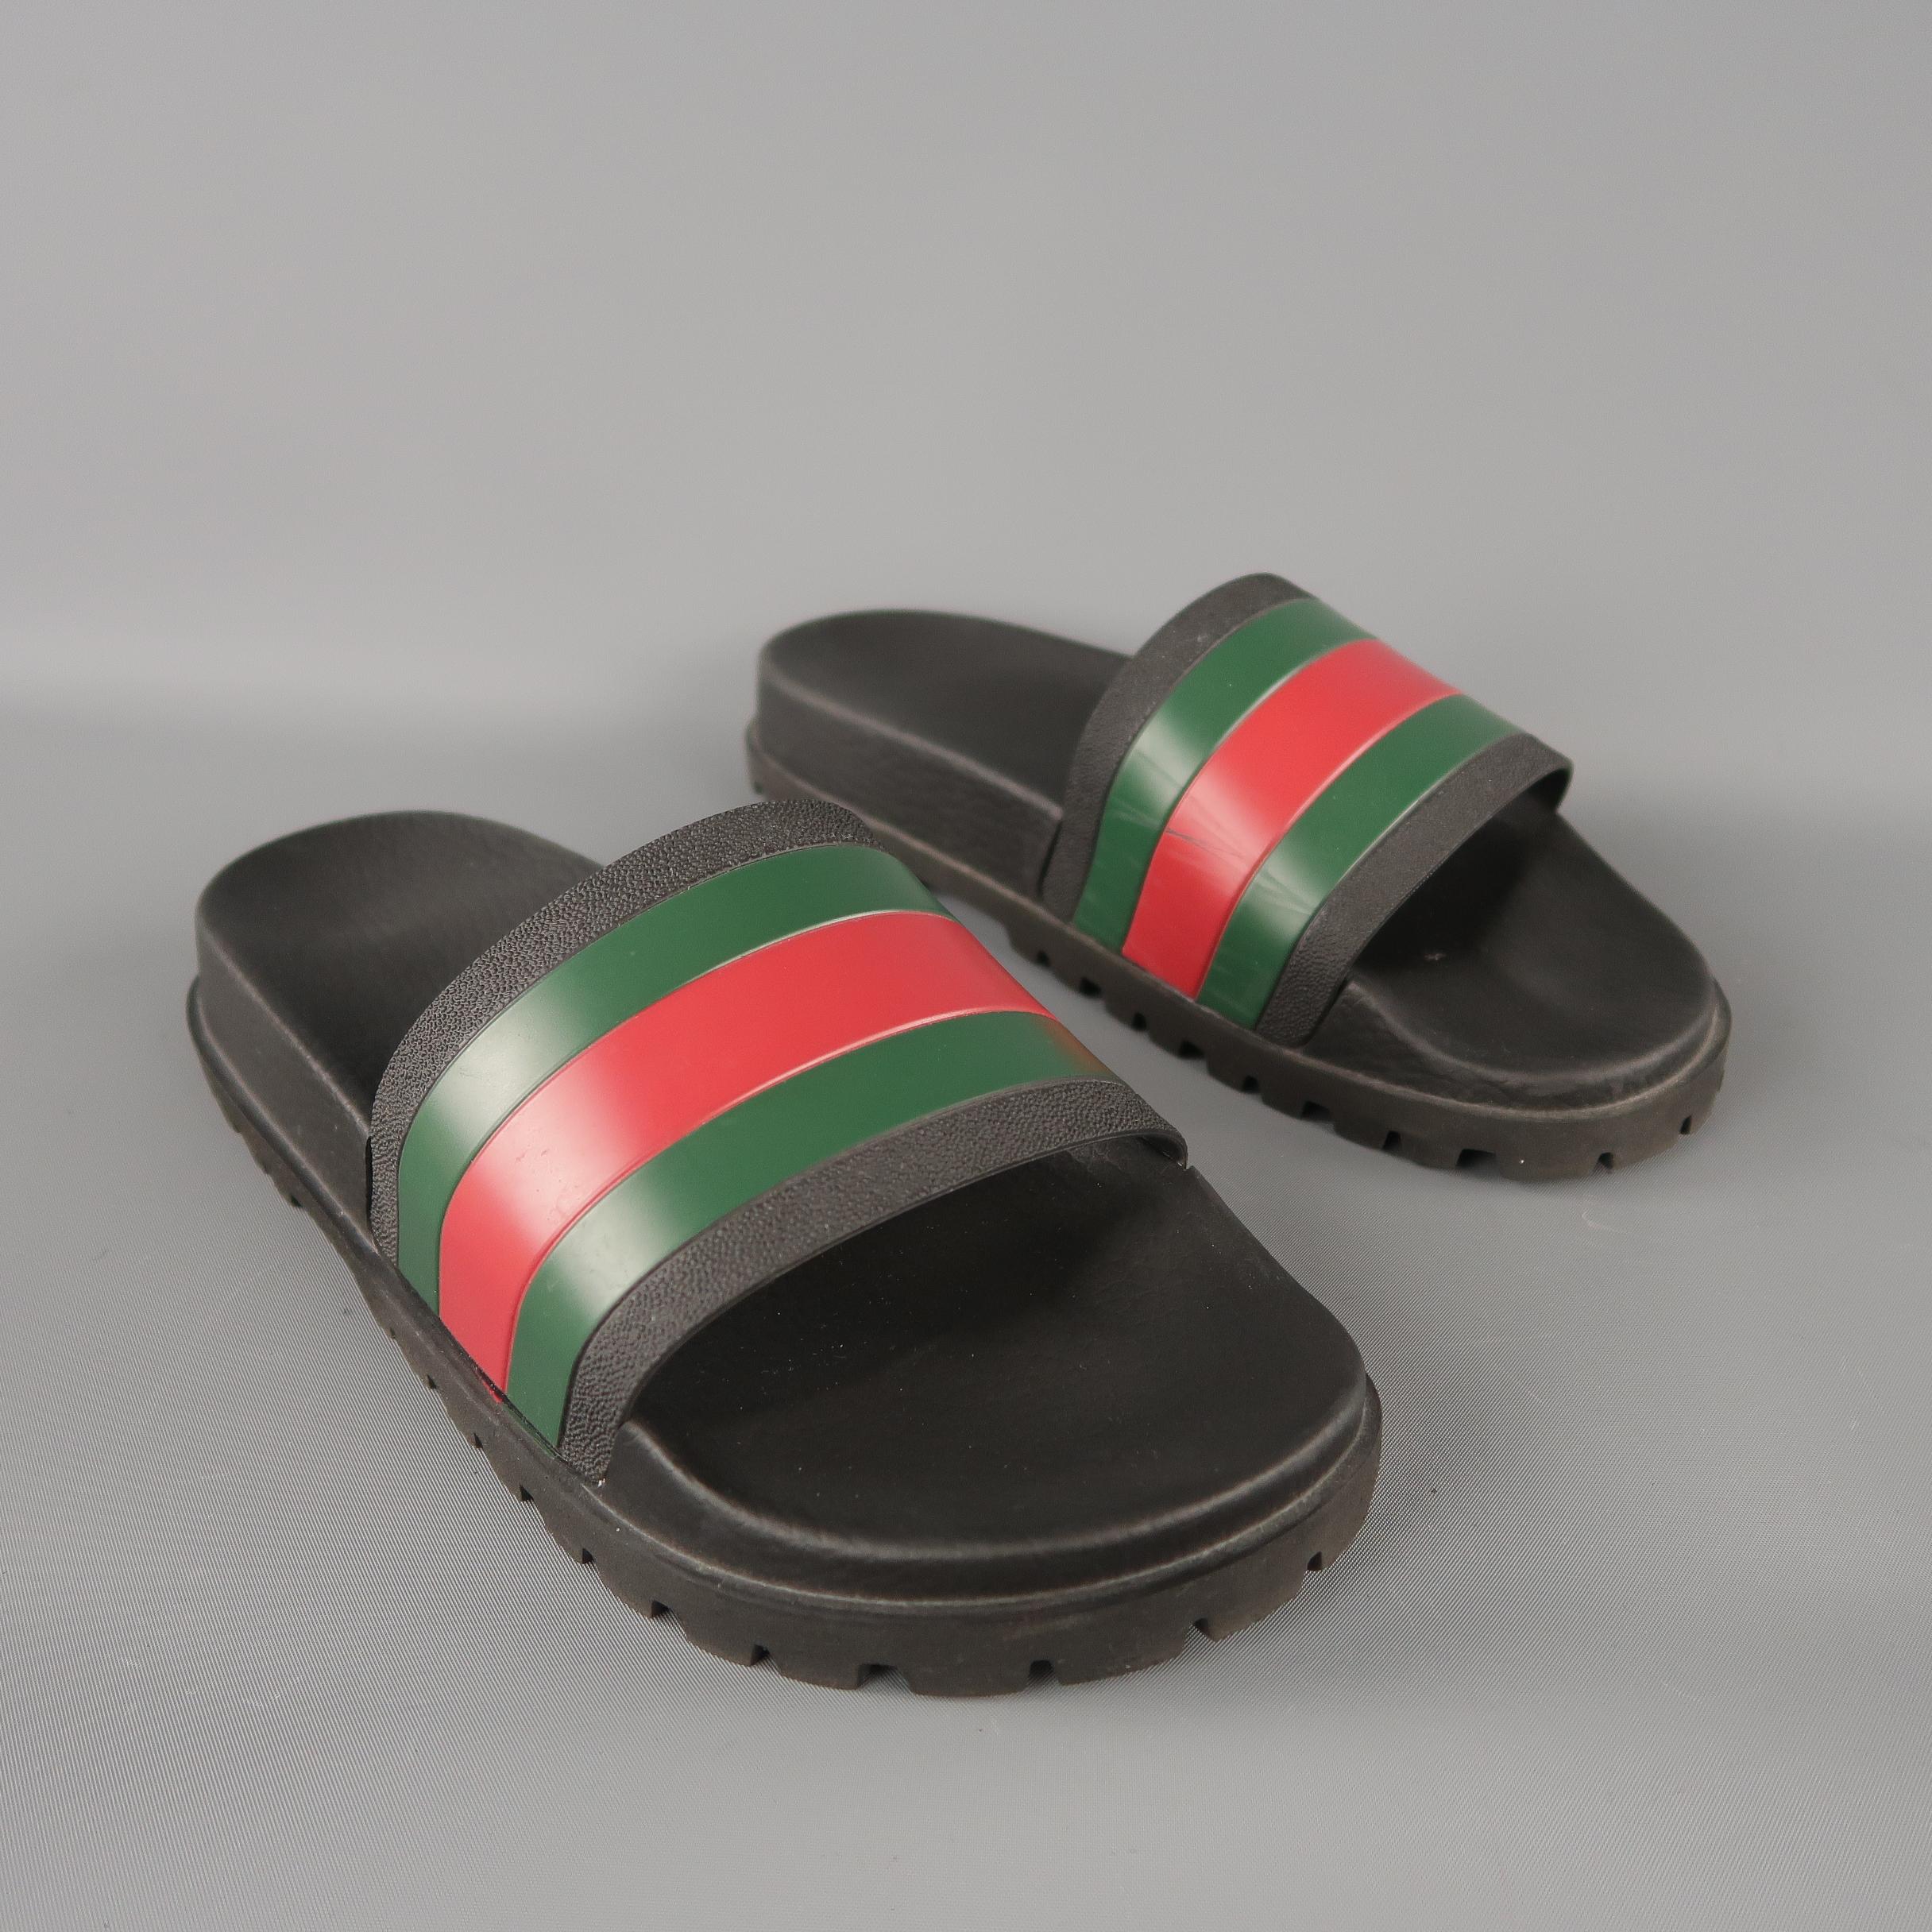 GUCCI web slide sandals are in black rubber material, with the classical brand stripes,  a molded rubber footbed and a rubber sole. Minor wear. Made in Italy.
 
Excellent Pre-Owned Condition.
Marked: 8 UK
 
Outsole: 11 x 3.5  in.